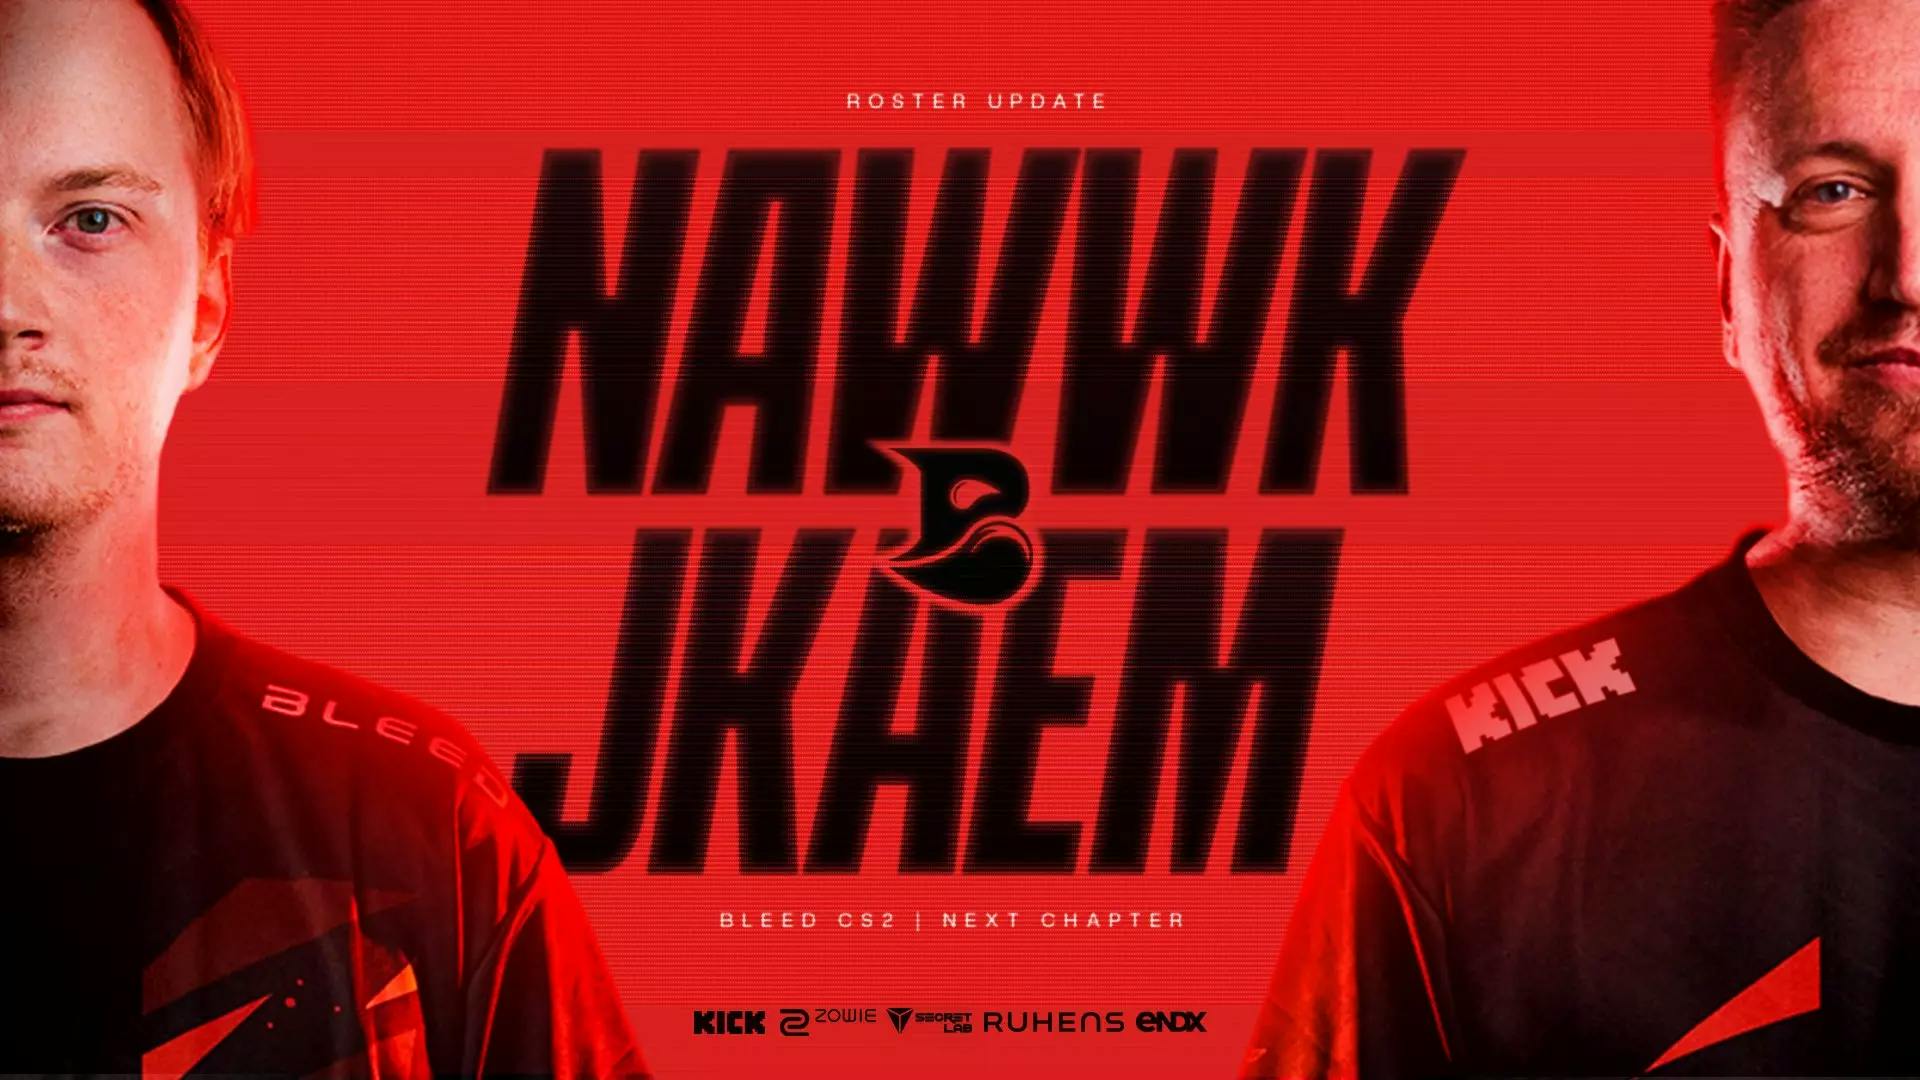 BLEED sign nawwk and jkaem to their CS2 roster